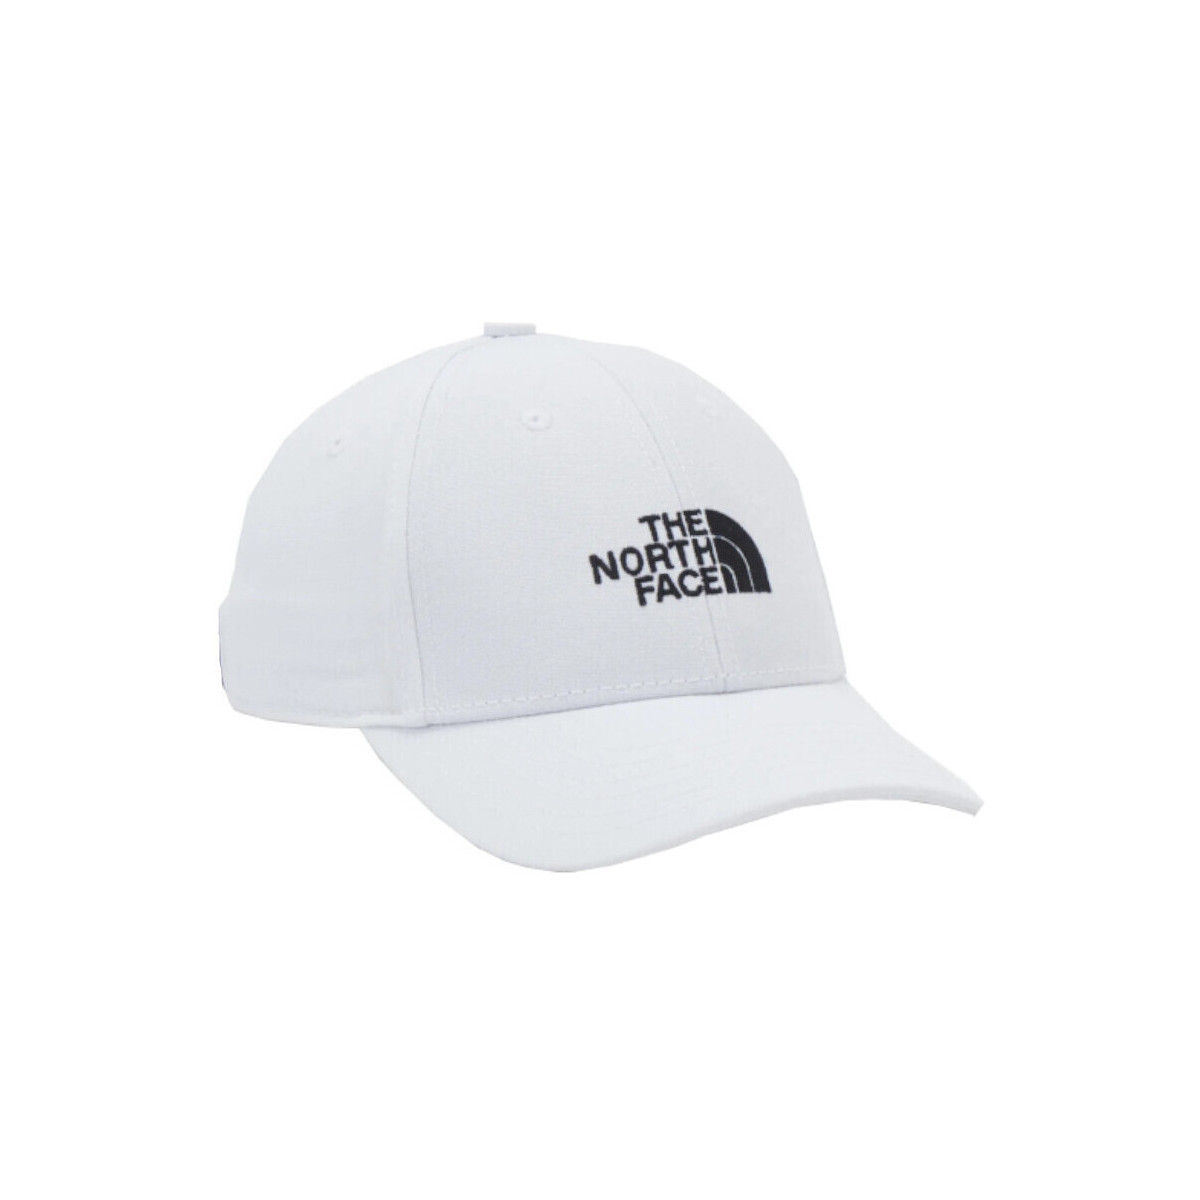 Accessoires Hüte The North Face NF0A4VSV Weiss